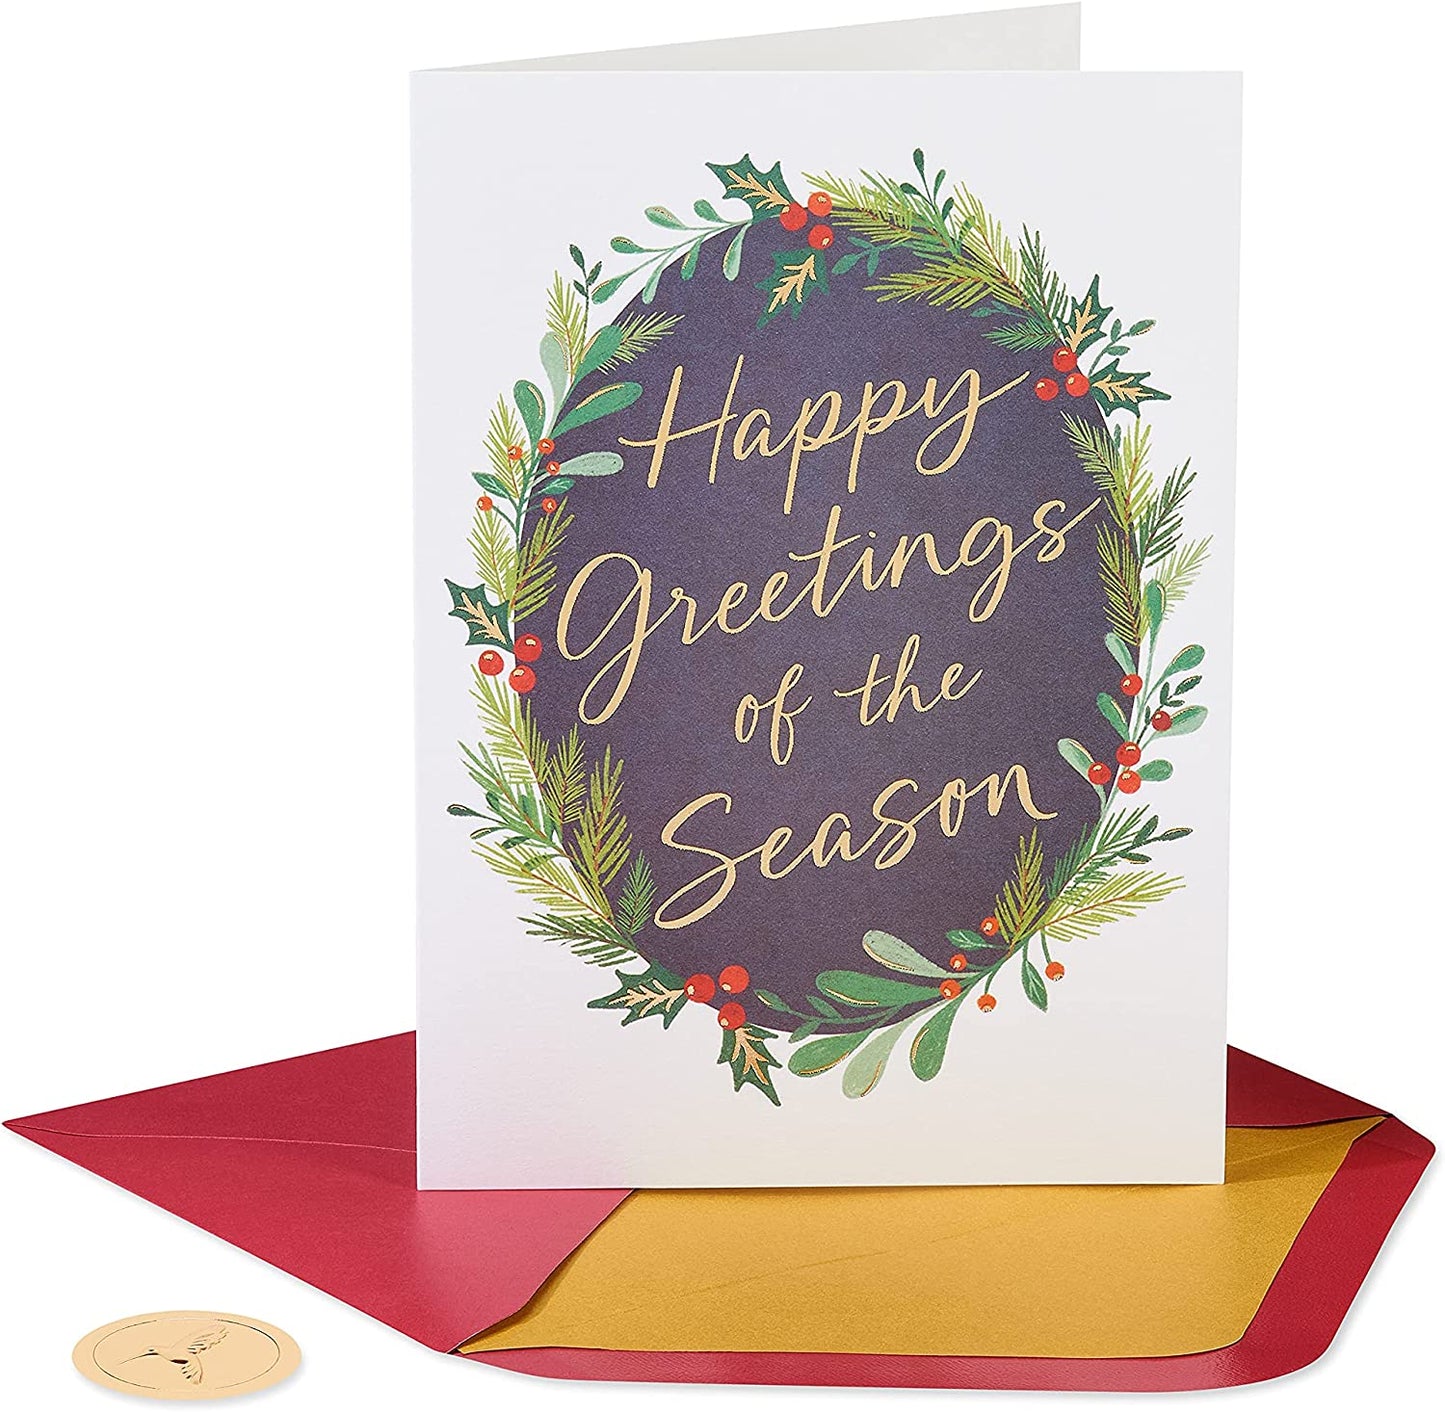 Papyrus Holiday Cards Boxed with Envelopes, Joy to You, Wreath (14-Count)